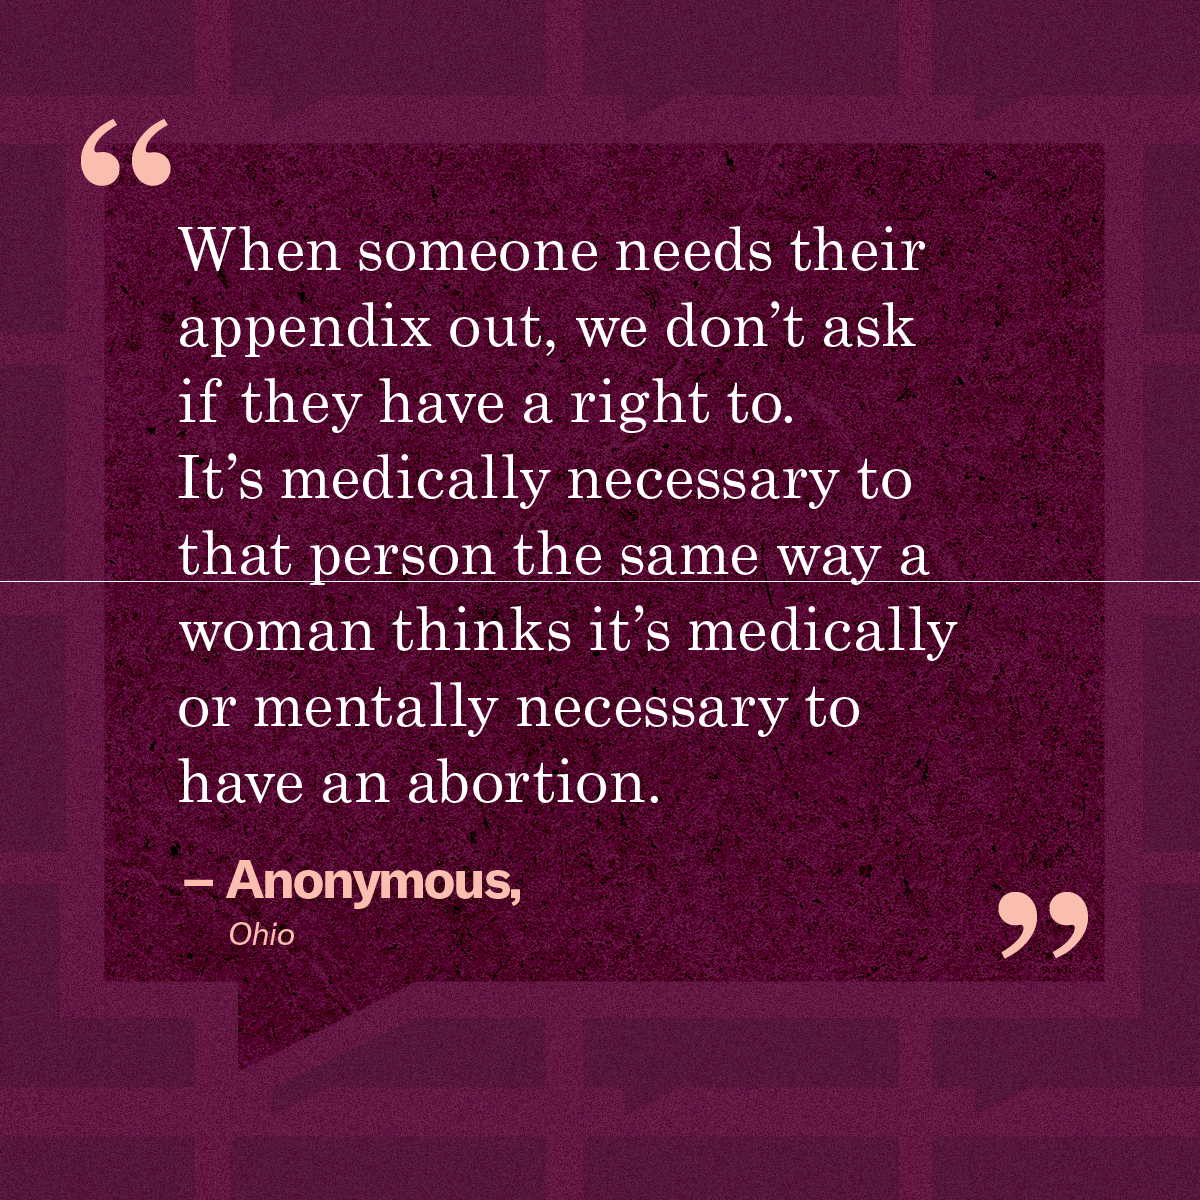 “When someone needs their appendix out, we don’t ask if they have a right to. It’s medically necessary to that person the same way a woman thinks it’s medically or mentally necessary to have an abortion.” – Anonymous, Ohio